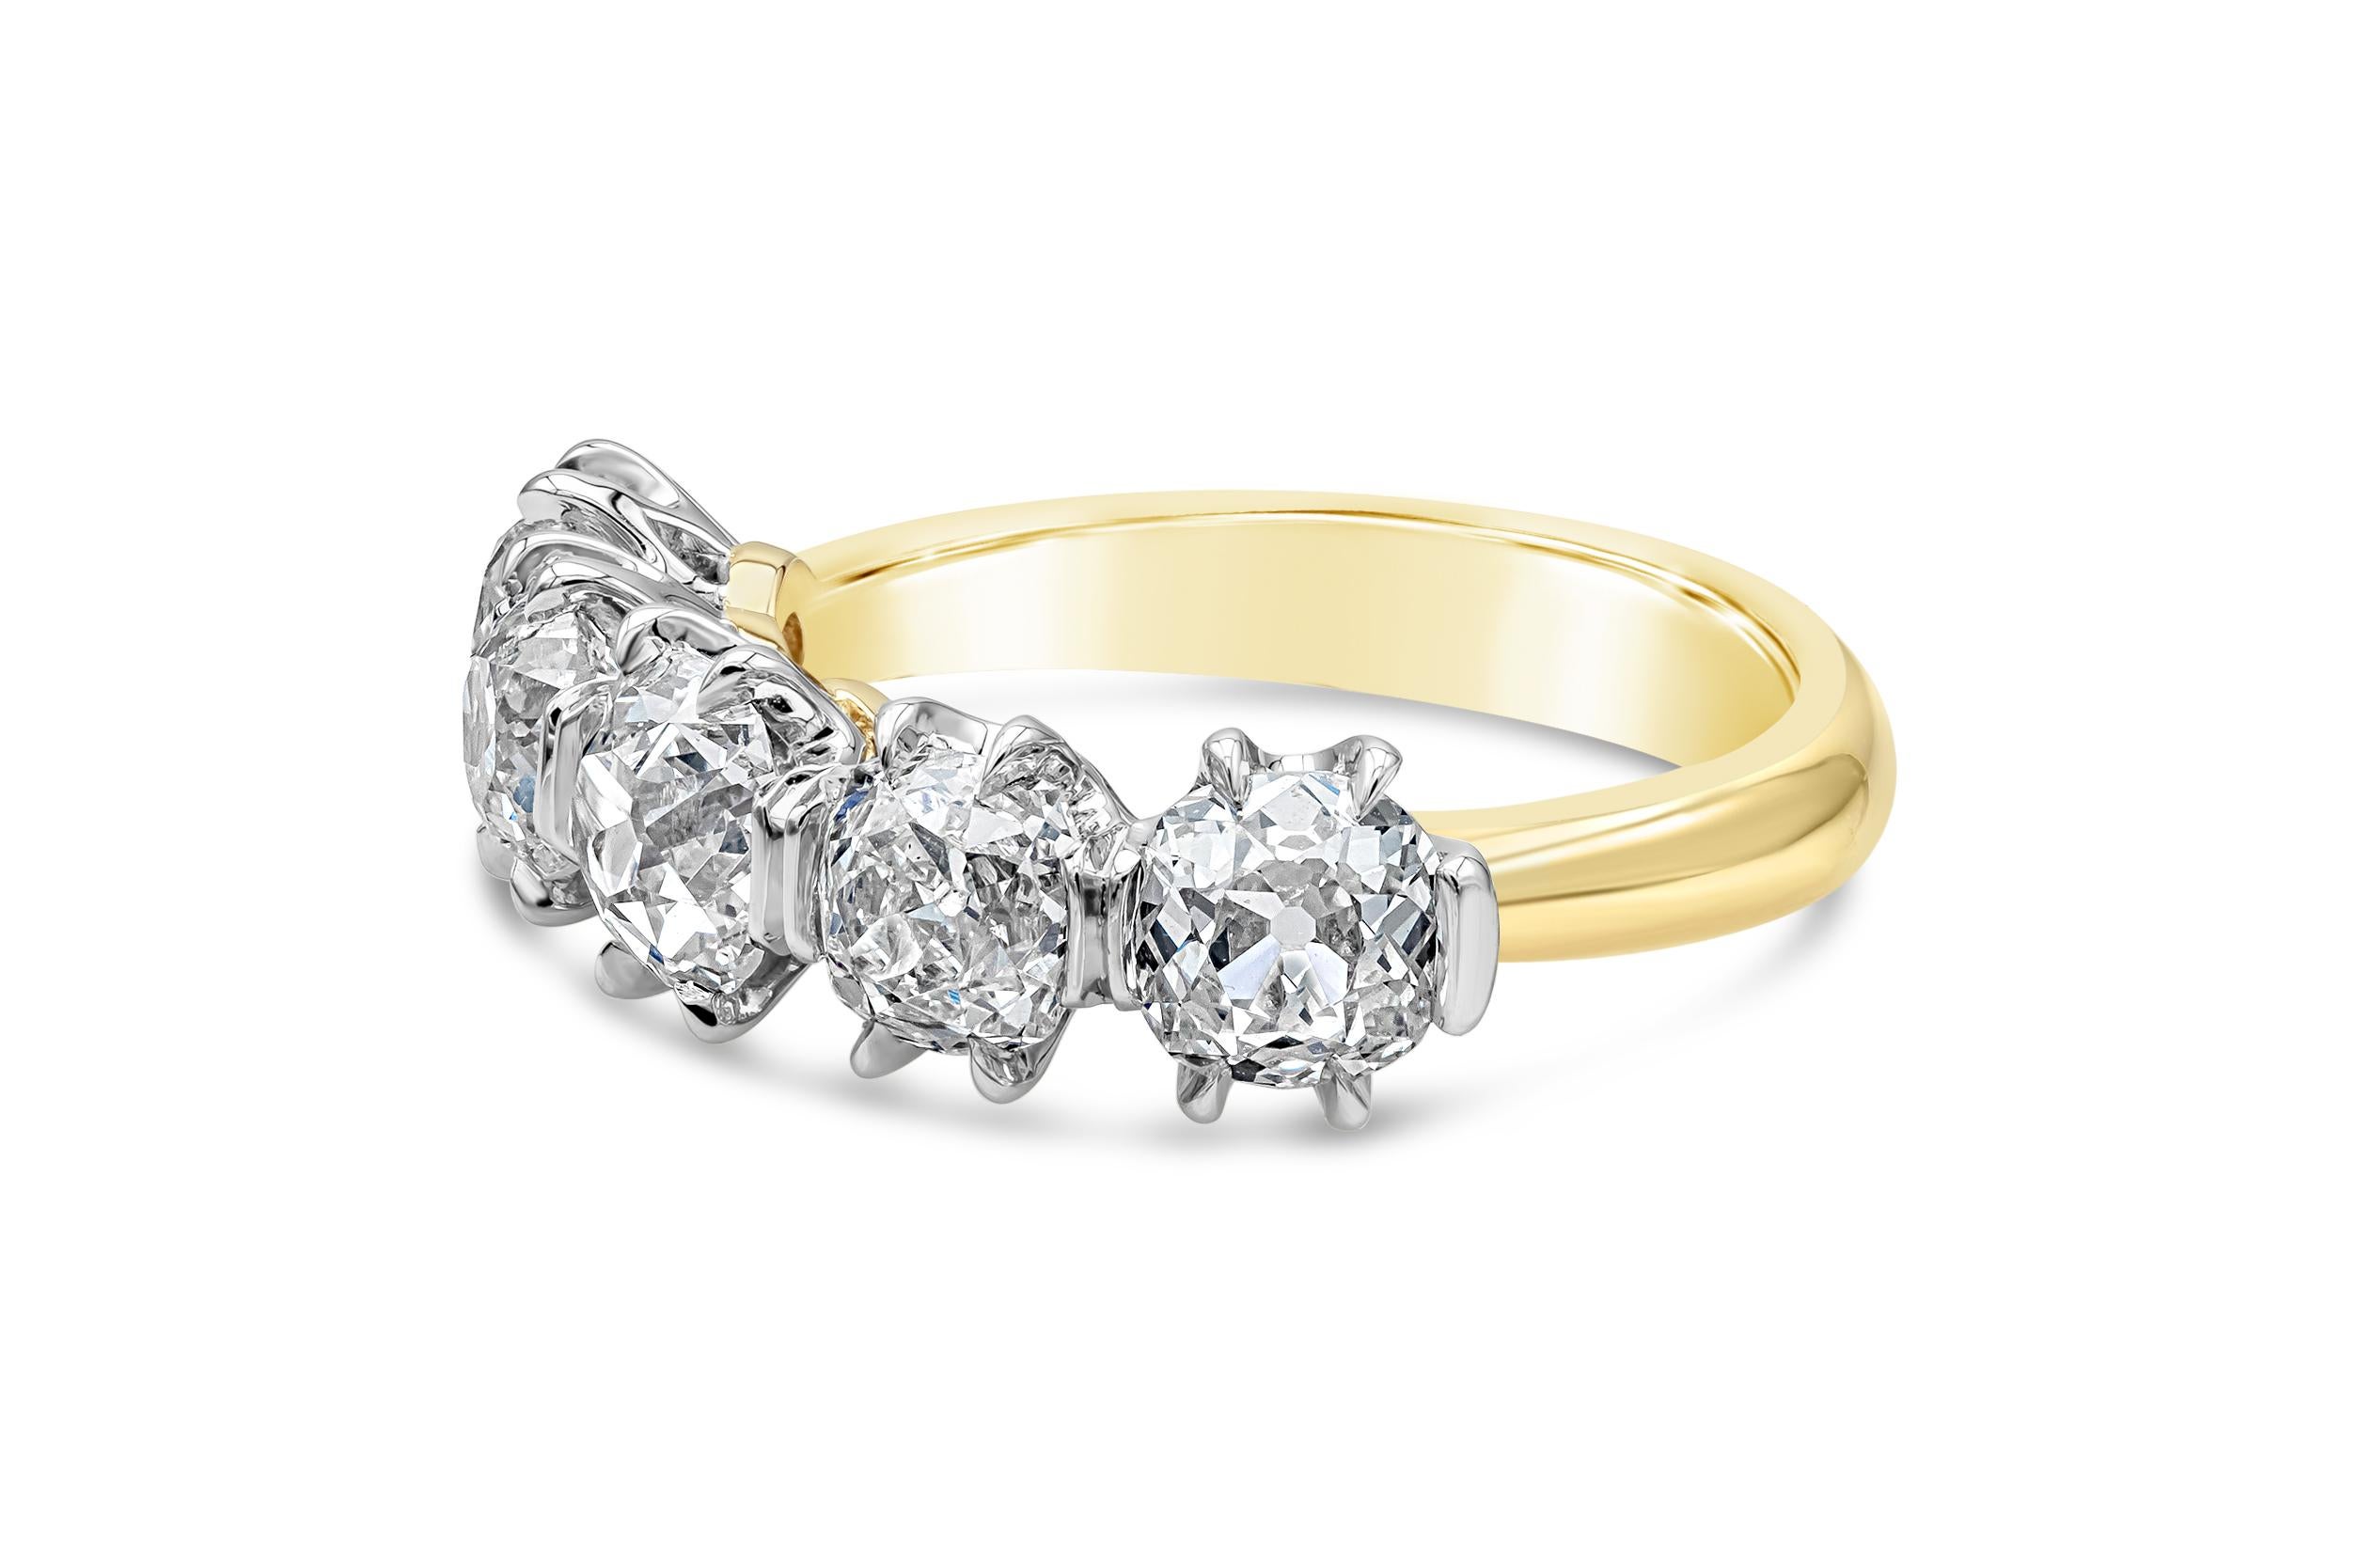 A unique and classy wedding band showcasing five (antique) old mine cut diamonds set in a six-prong platinum basket setting. Diamonds weigh 2.96 carats total, D-H Color and VS in Clarity. Finely made in 14K Yellow Gold and Size 6 US resizable upon